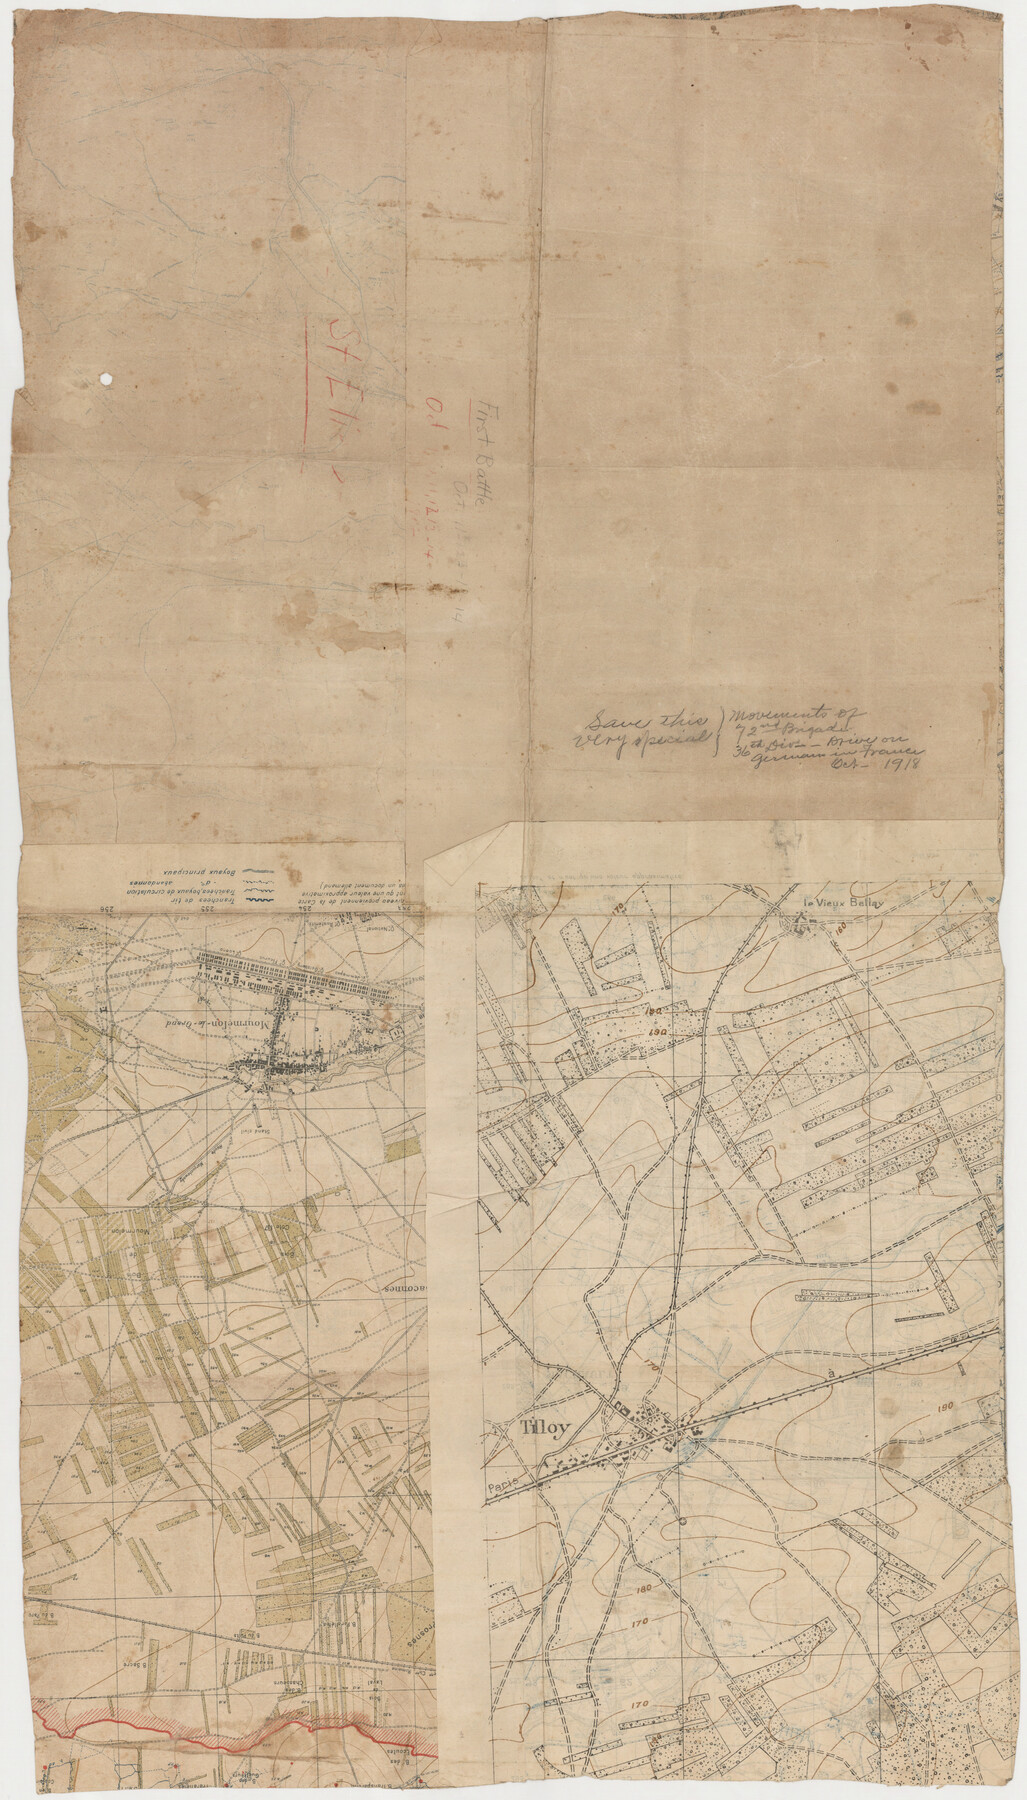 94130, [WWI Topographic Planning Map of the Ardennes department] - Verso, Non-GLO Digital Images